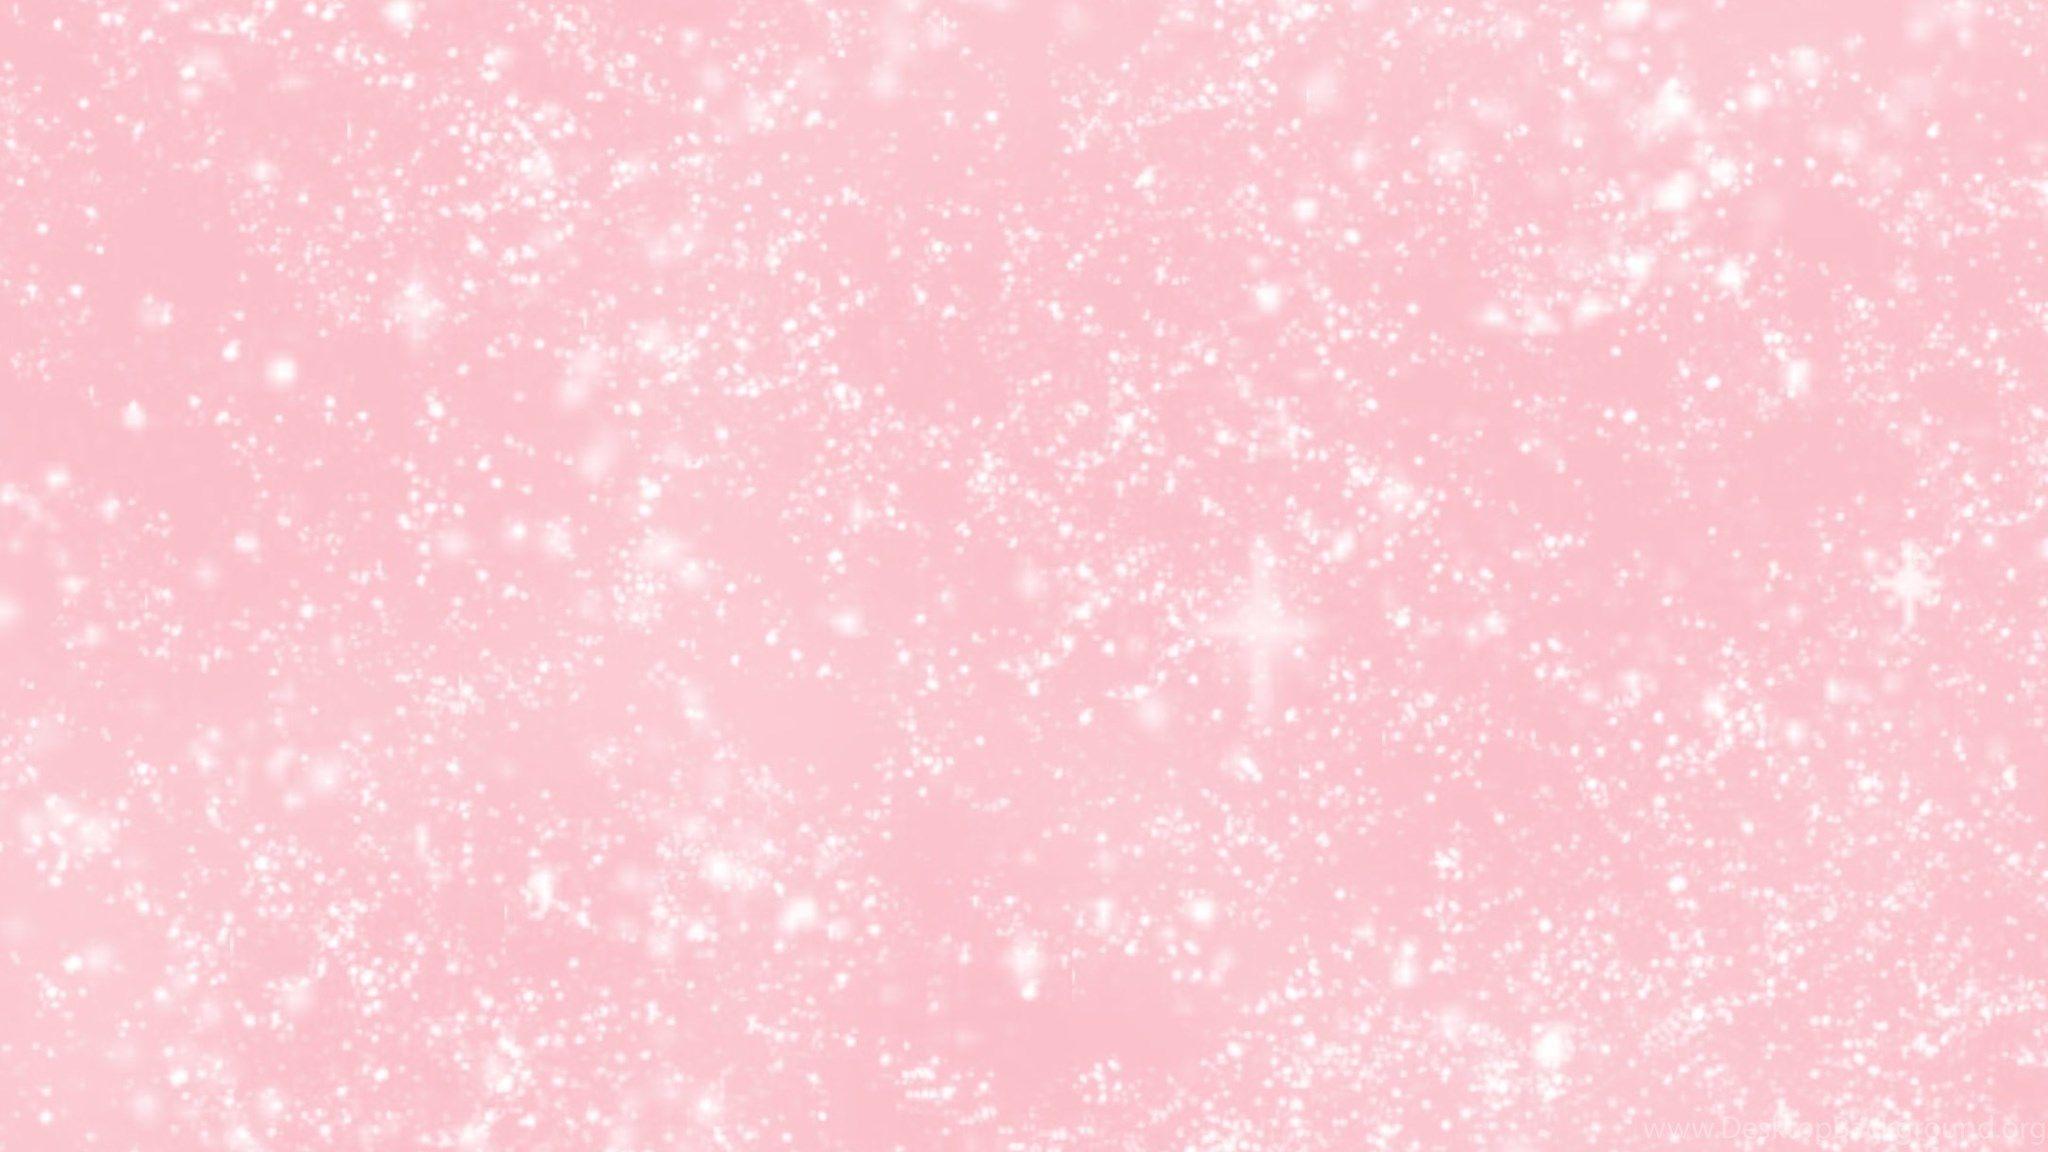 Aesthetic Pink Background 2048 X 1152 / Wallpaper White Lines Pink